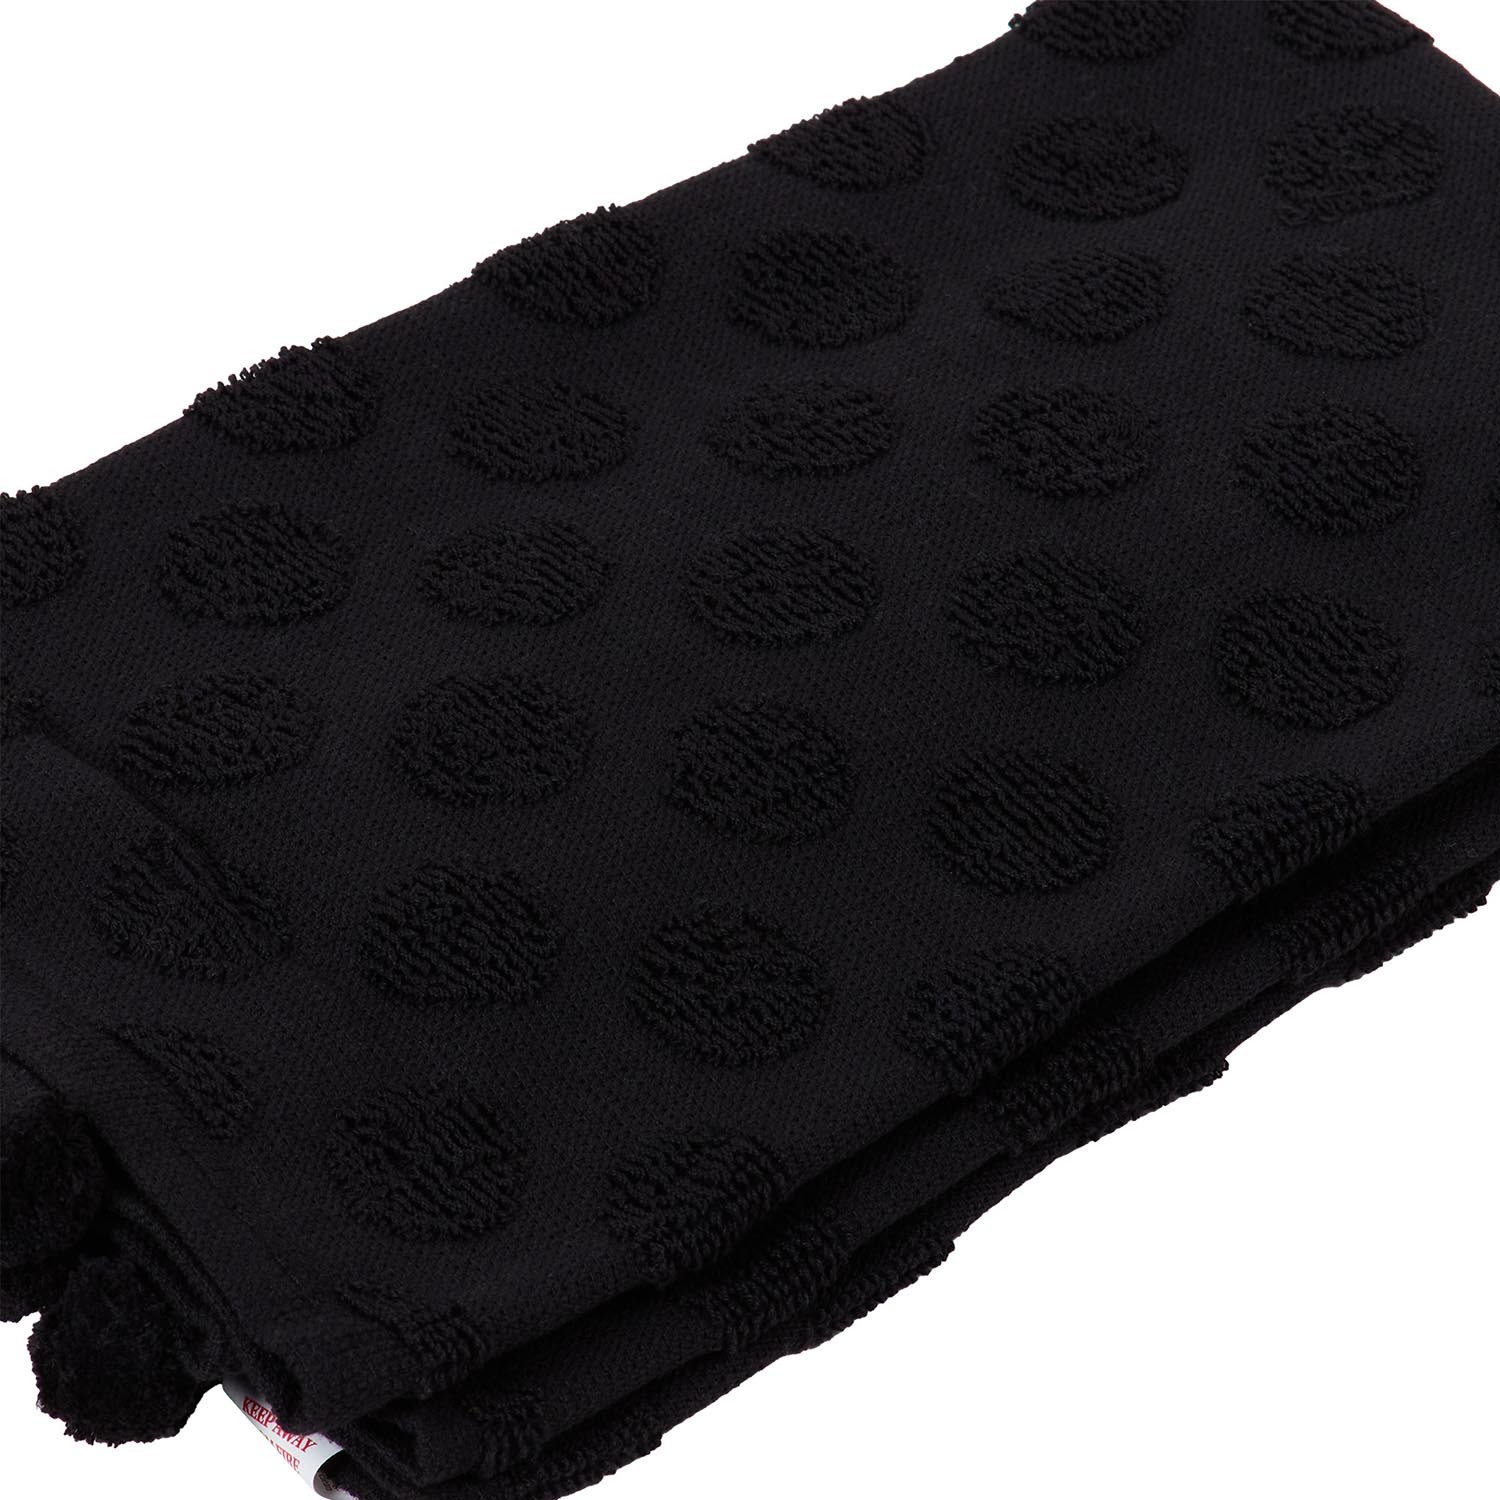 Pack of 2 Dobby Terry Kitchen Towels with Pom Poms - Black Image 7